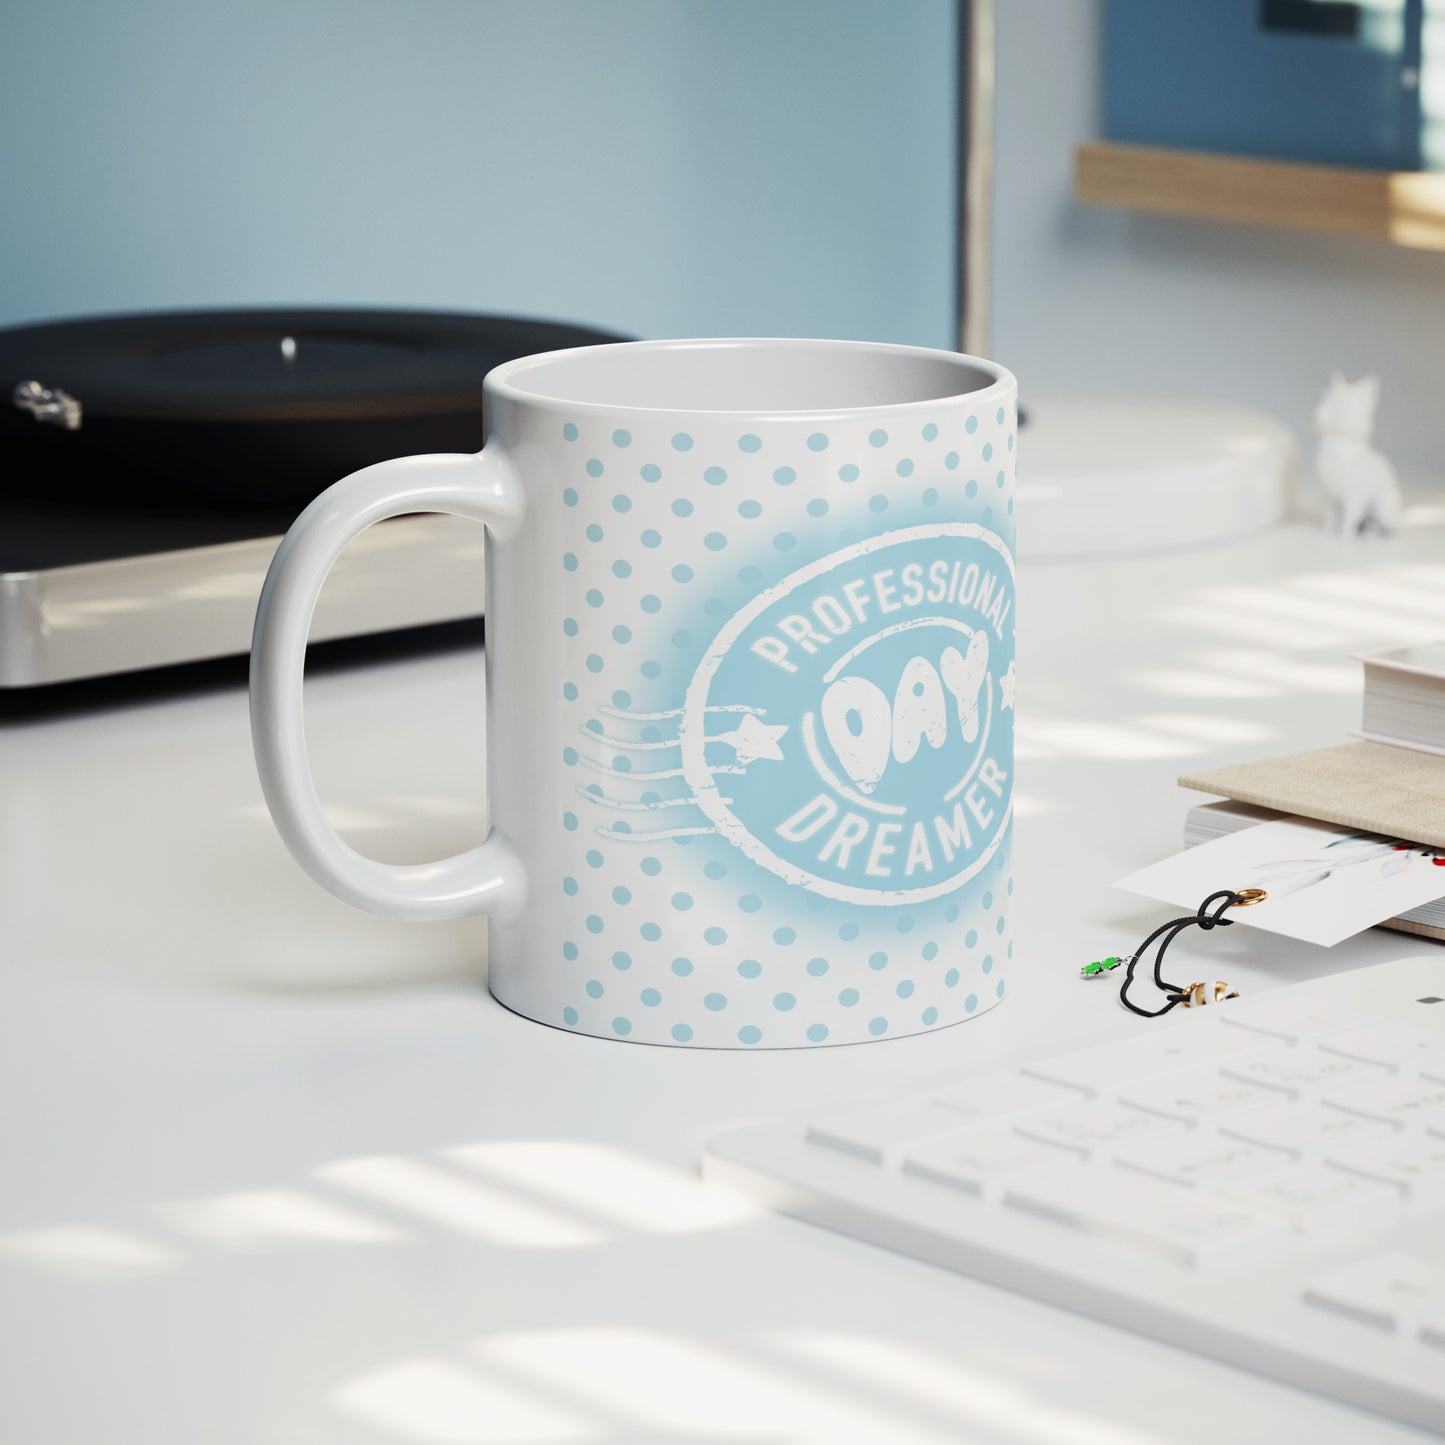 The Professional Day Dreamer Mug in Blue